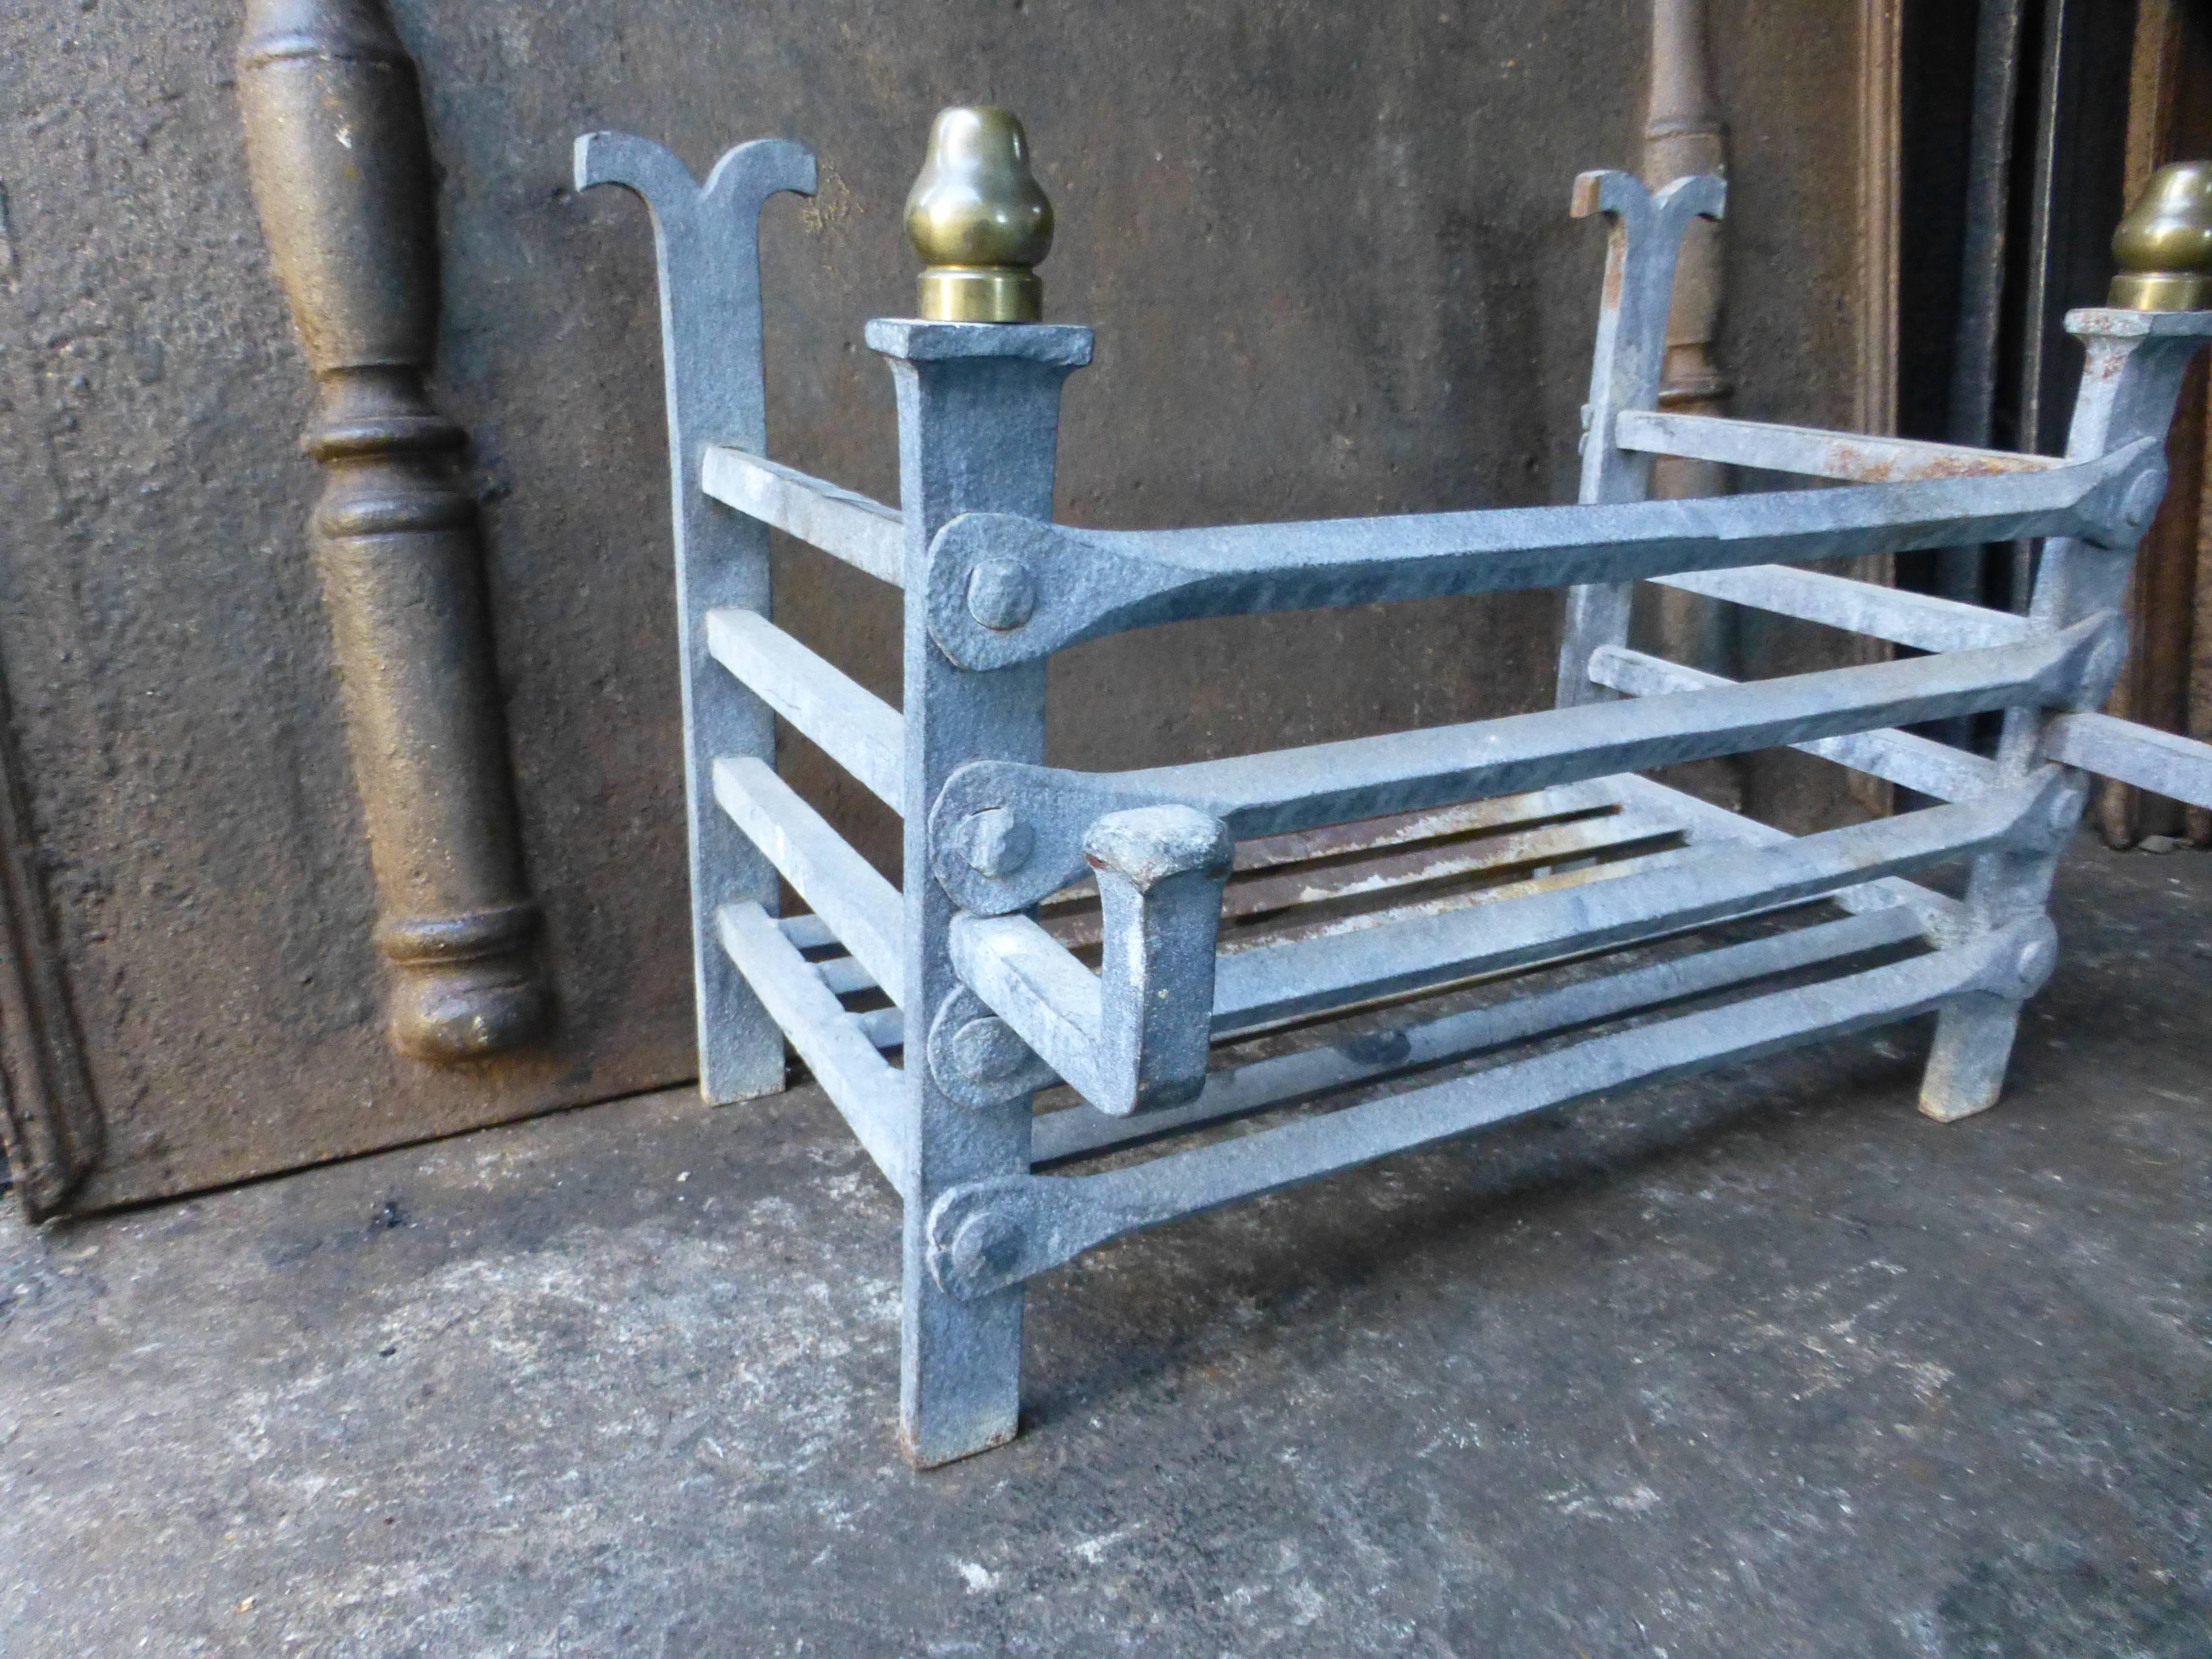 20th Century English Fire Grate, Fireplace Grate